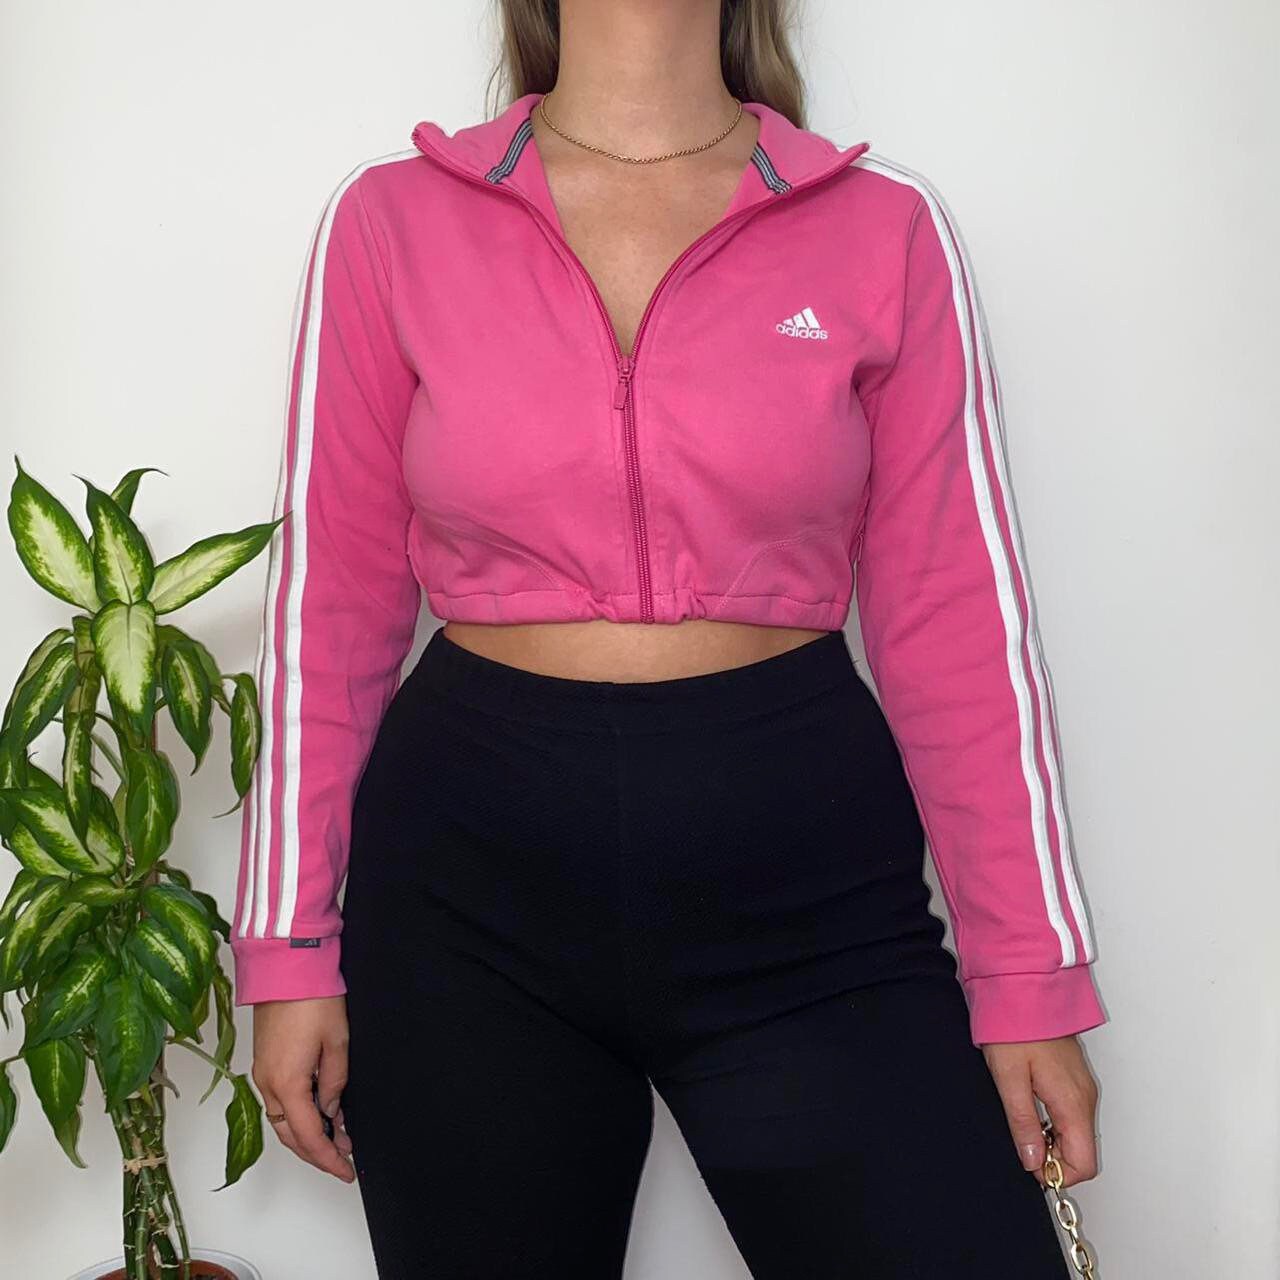 bright pink cropped jumper with small white Adidas text and symbol logo on chest shown on a model wearing black trousers